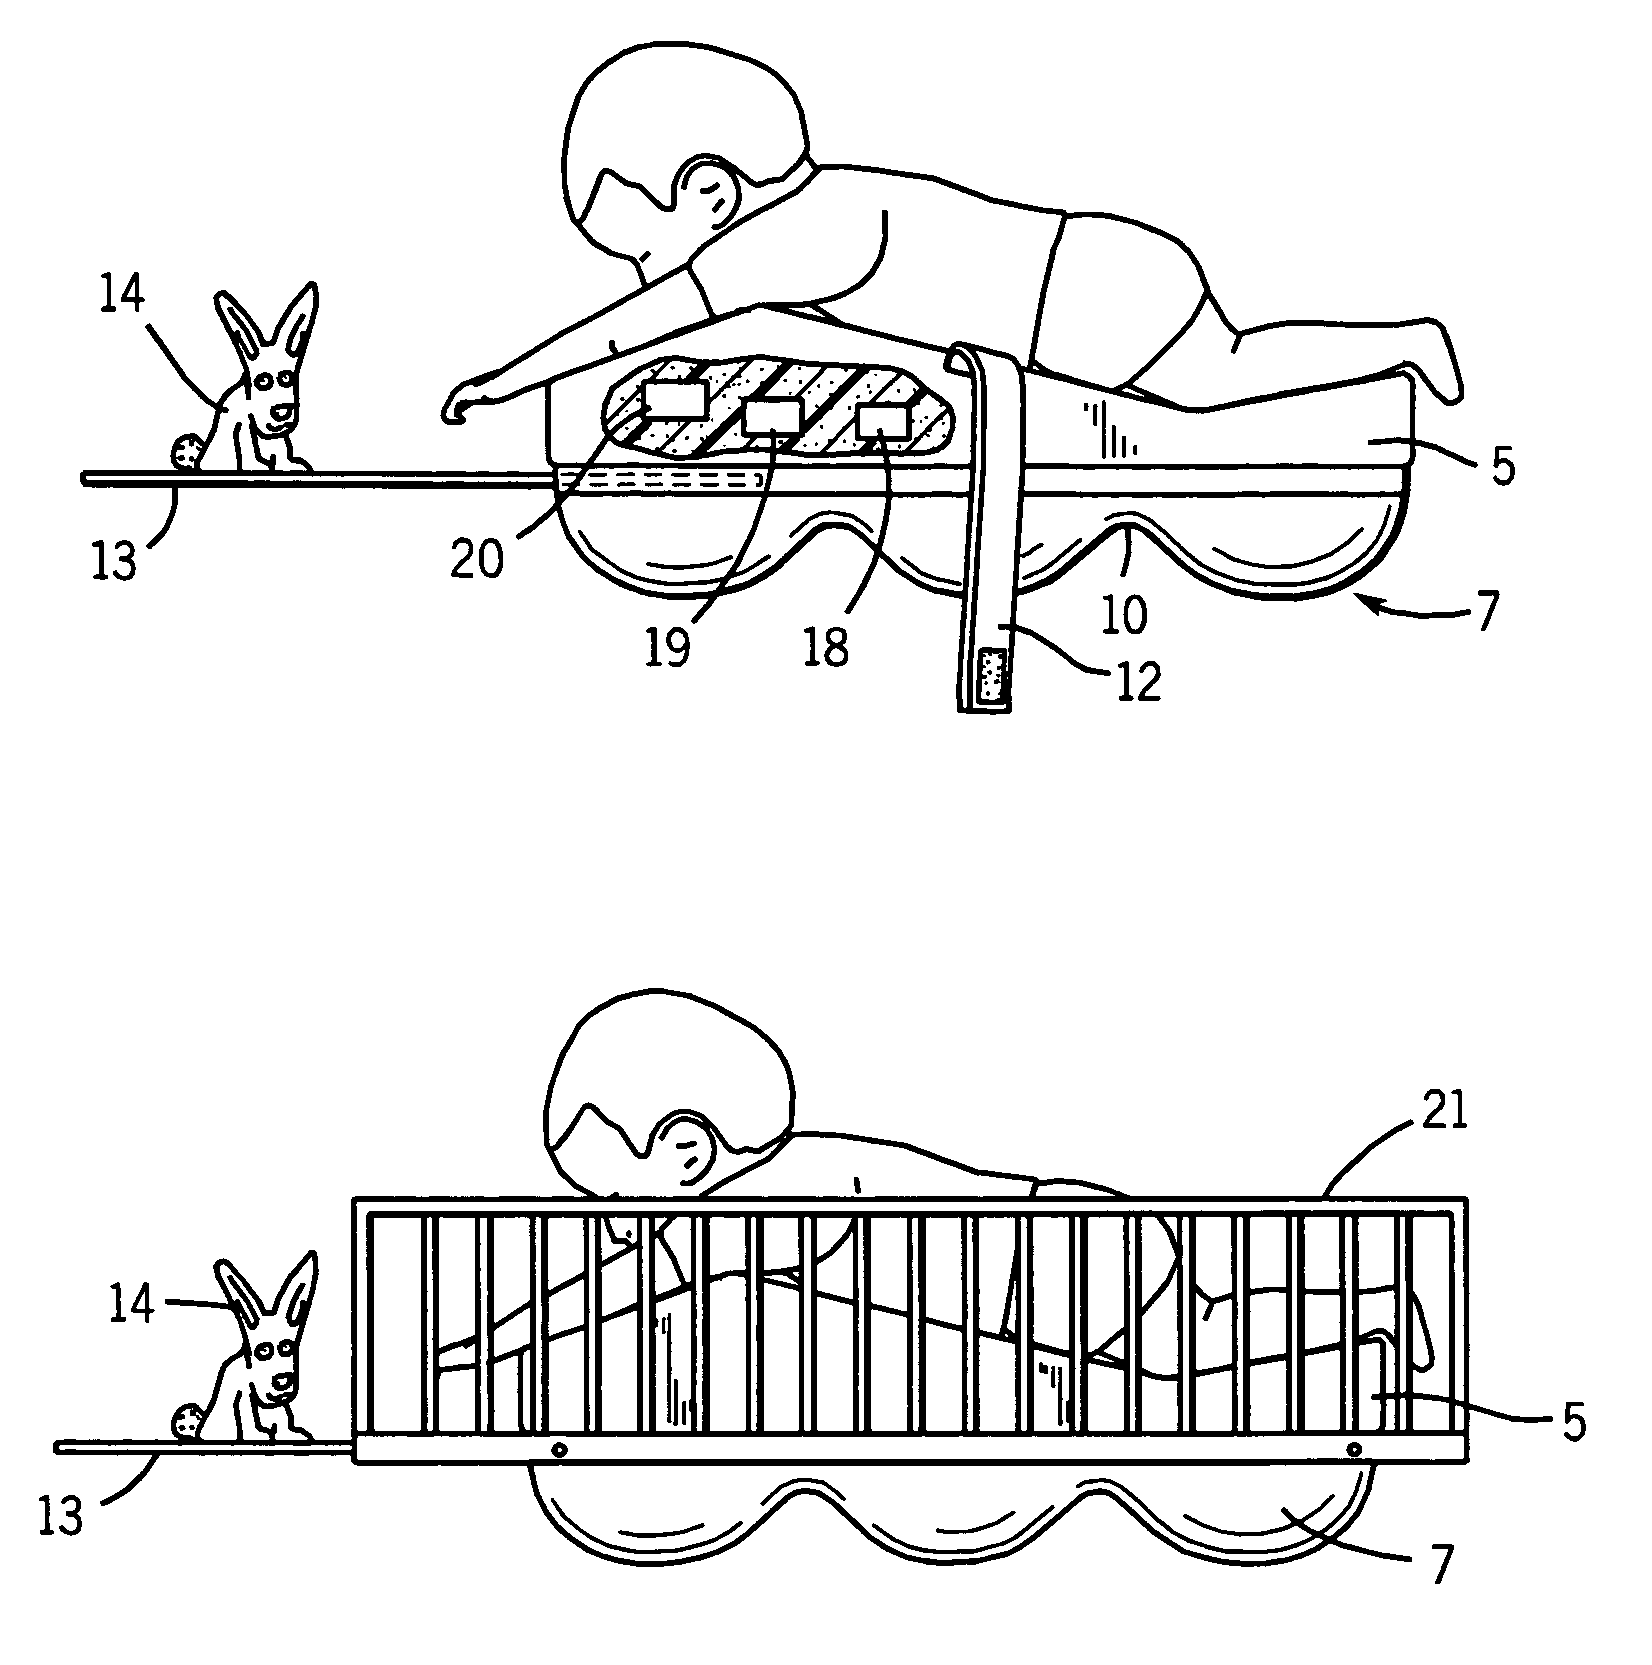 Infant support apparatus